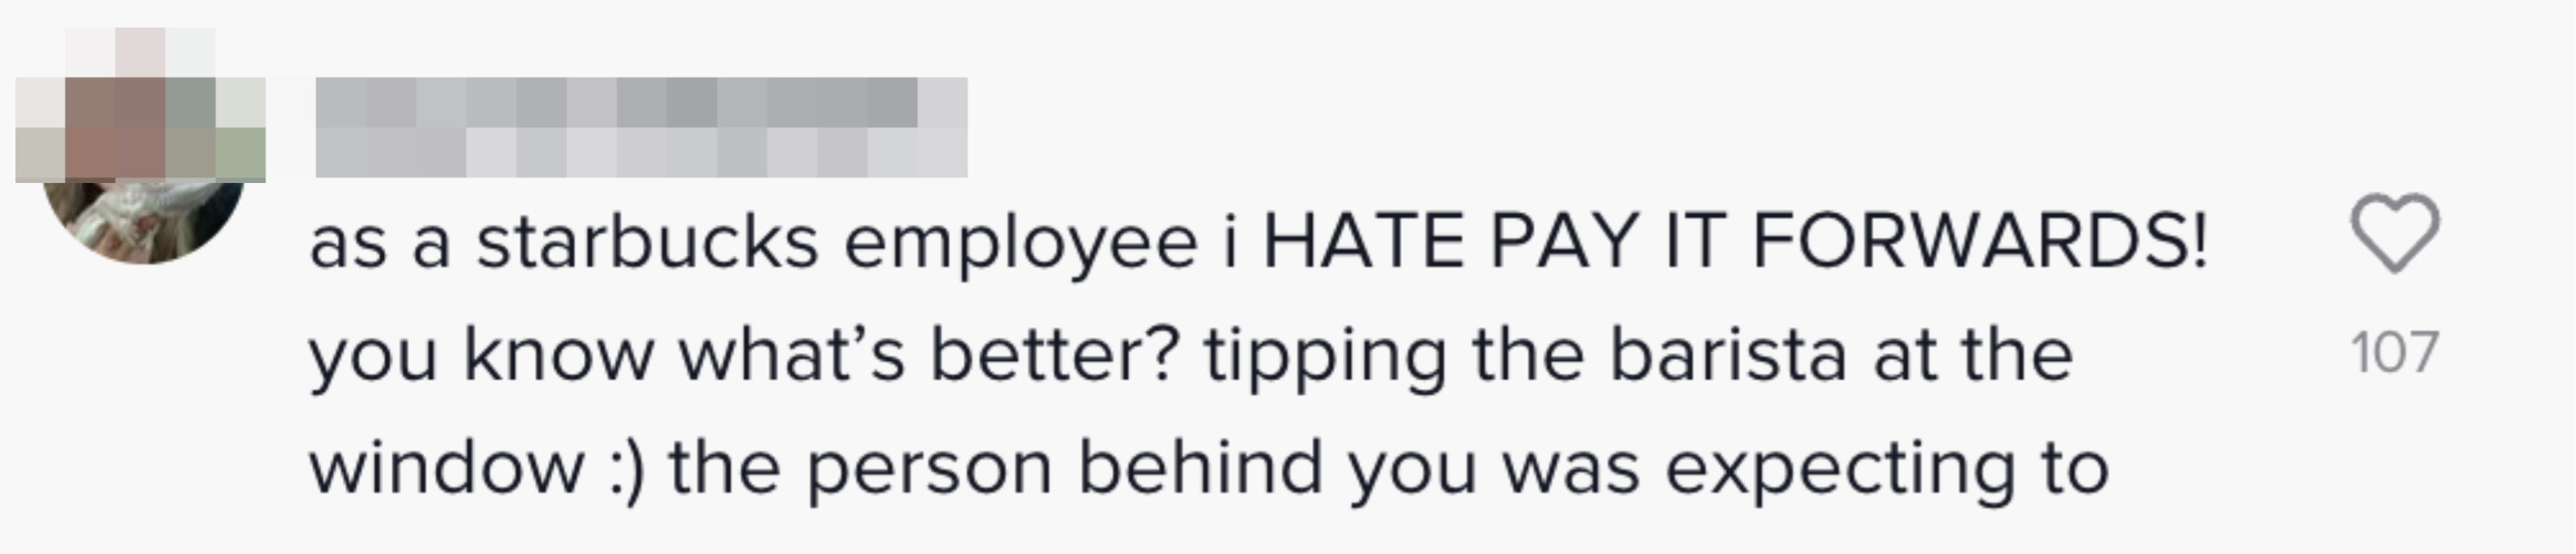 Comment: &quot;As a starbucks employee i HATE PAY IT FORWARDS! you know what&#x27;s better? tipping the barista at the window&quot;